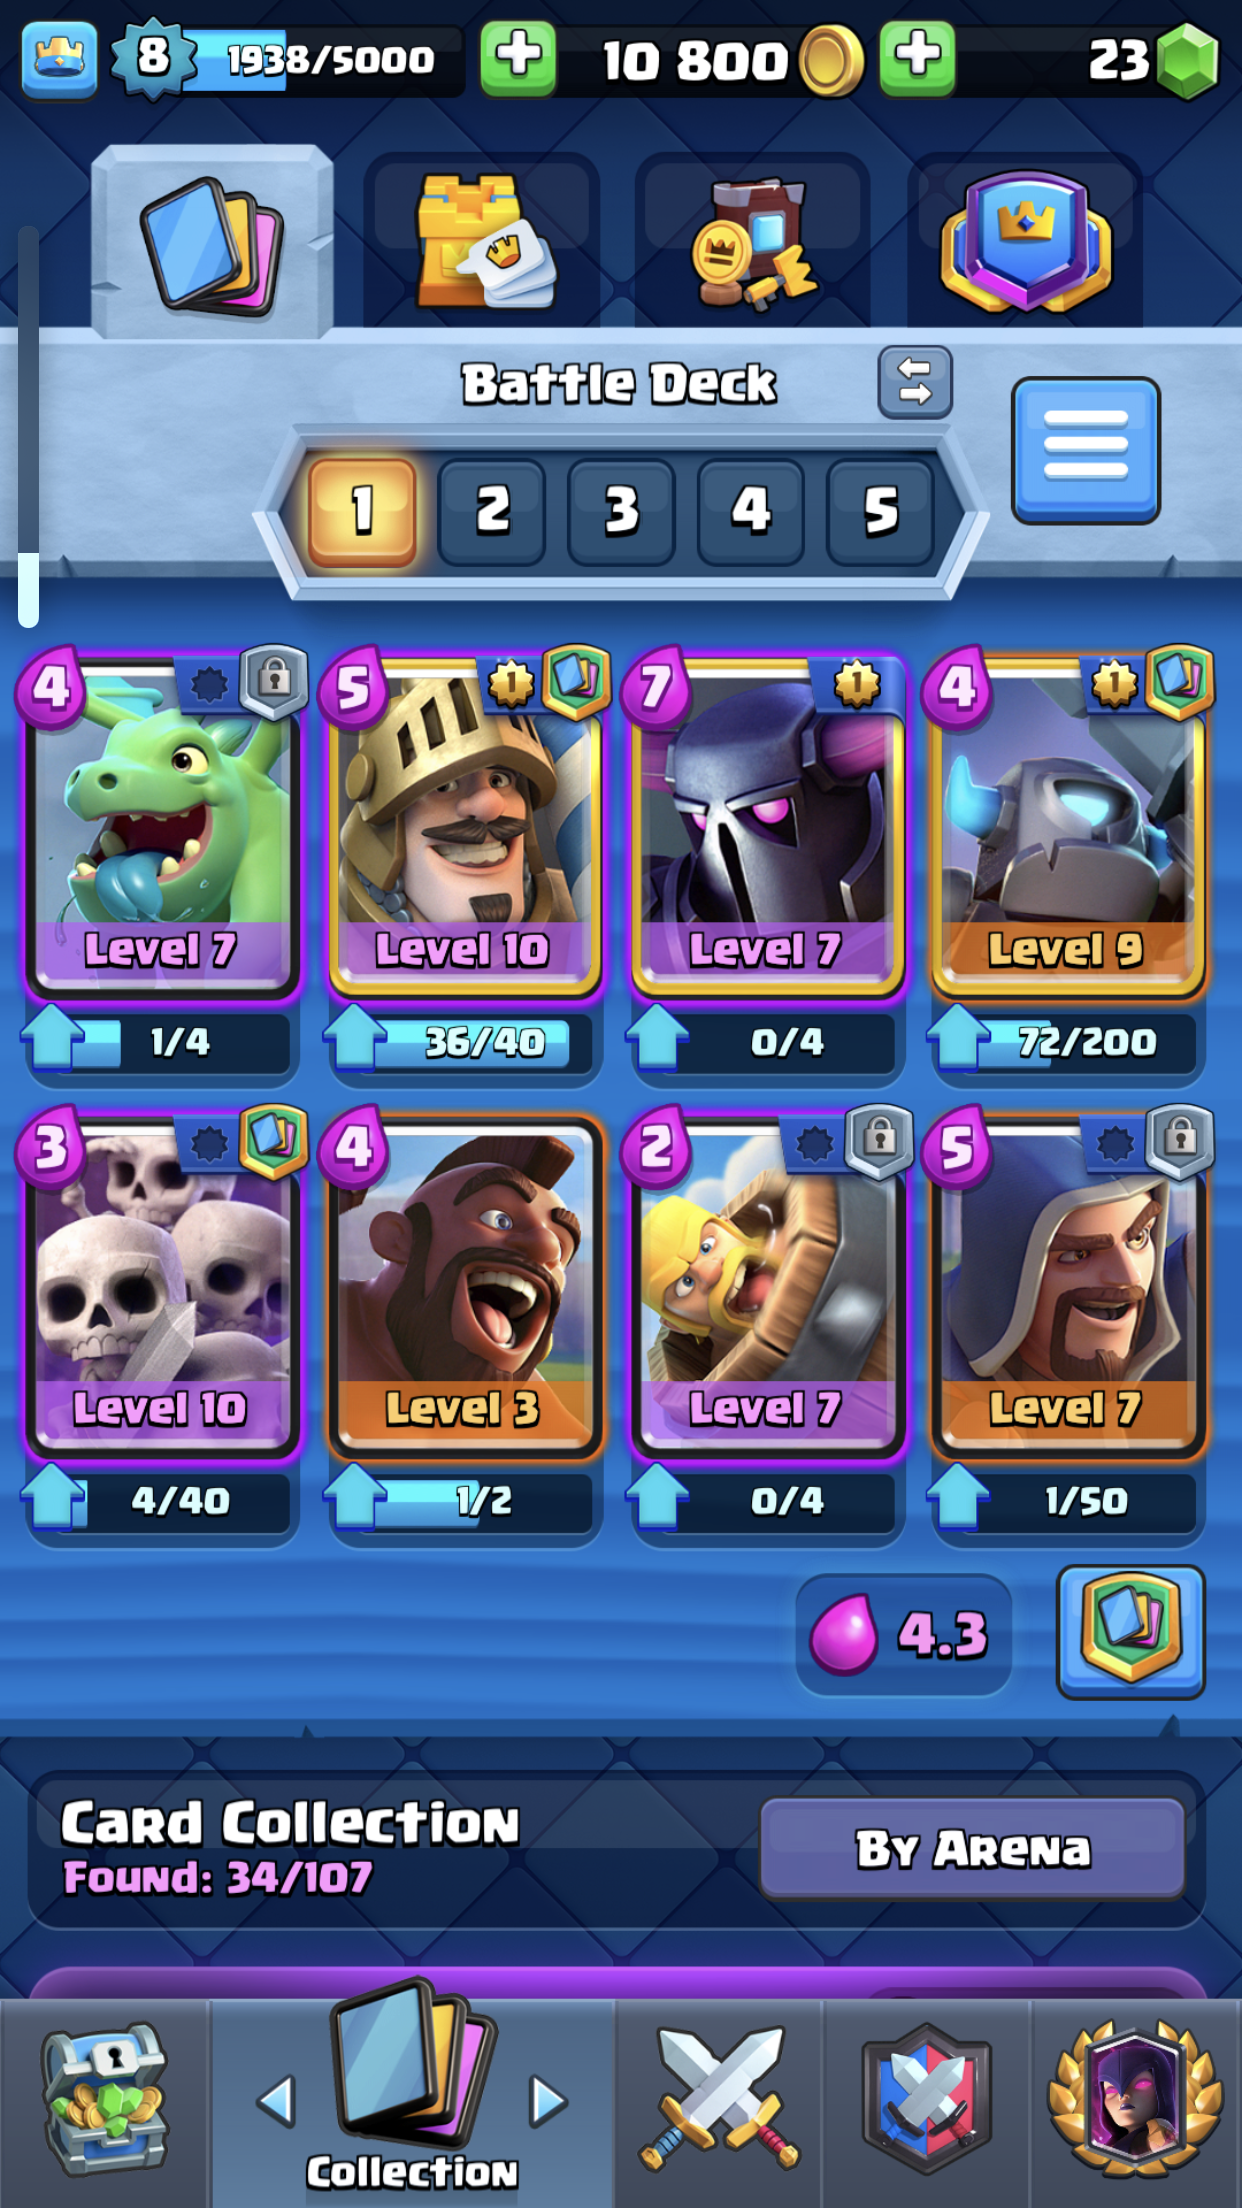 Really good deck for arena 5